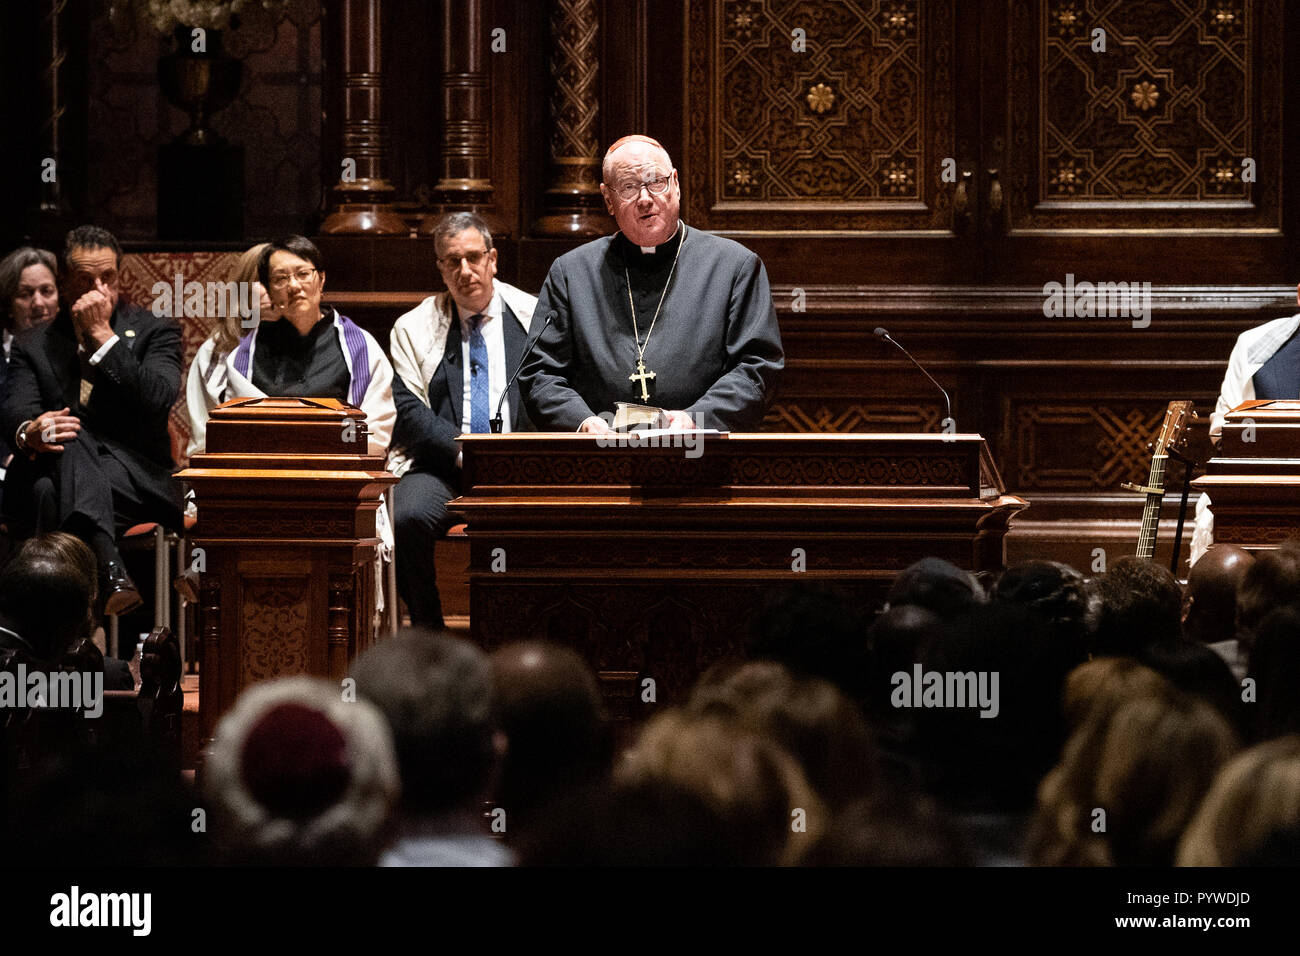 New York, New York, USA. 30th Oct, 2018. Cardinal Timothy Dolan speaking at the interfaith prayer vigil for the shooting at the Tree of Life Synagogue in Pittsburgh, Pennsylvania (October 27) at the Central Synagogue in New York City. Credit: SOPA Images Limited/Alamy Live News Stock Photo